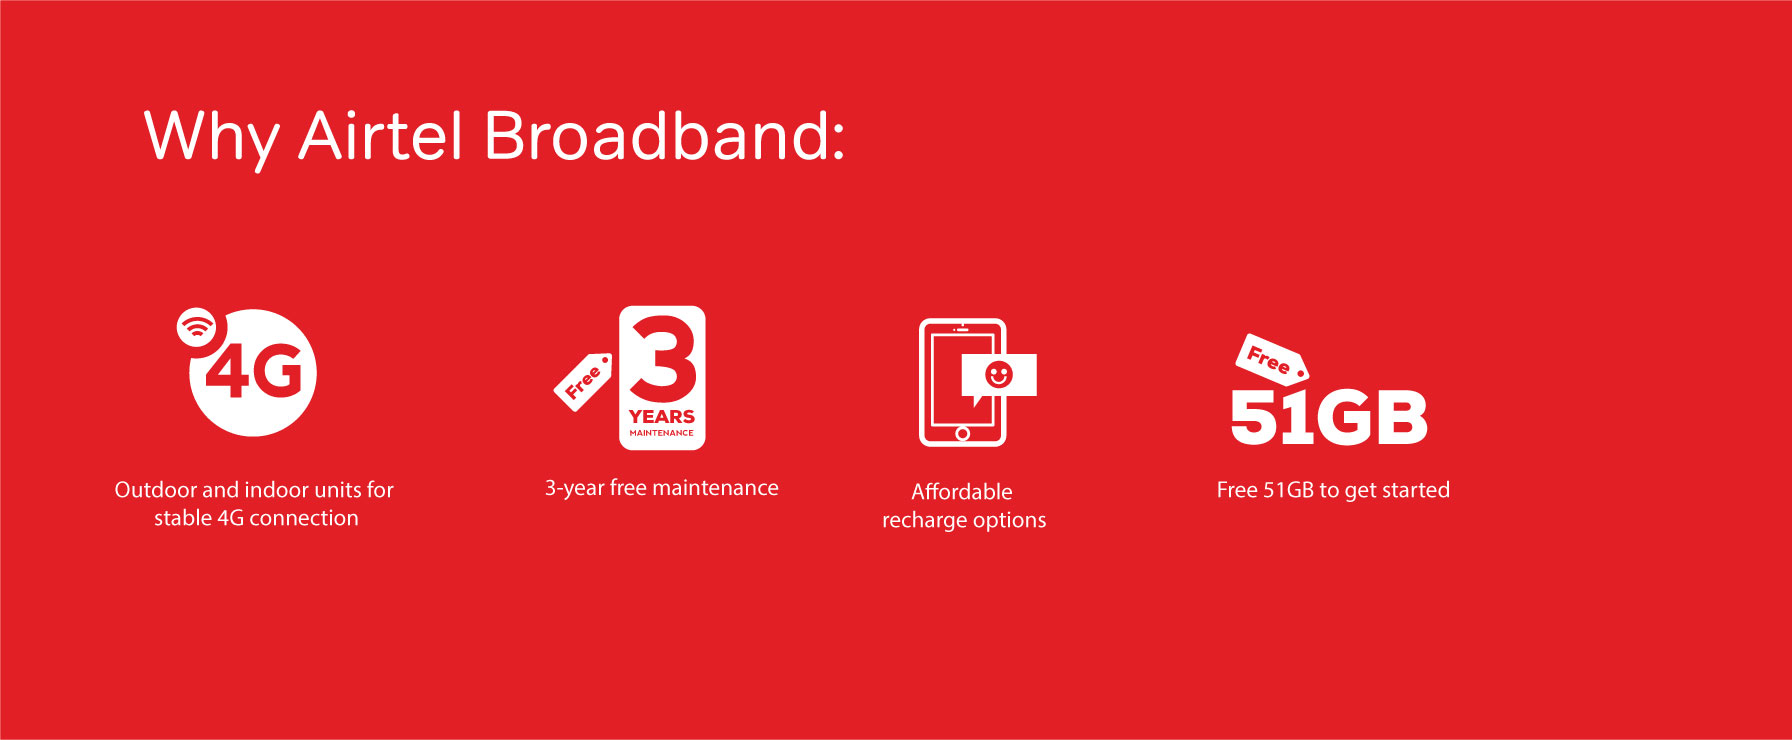 Play board games online with high-speed Airtel Broadband!